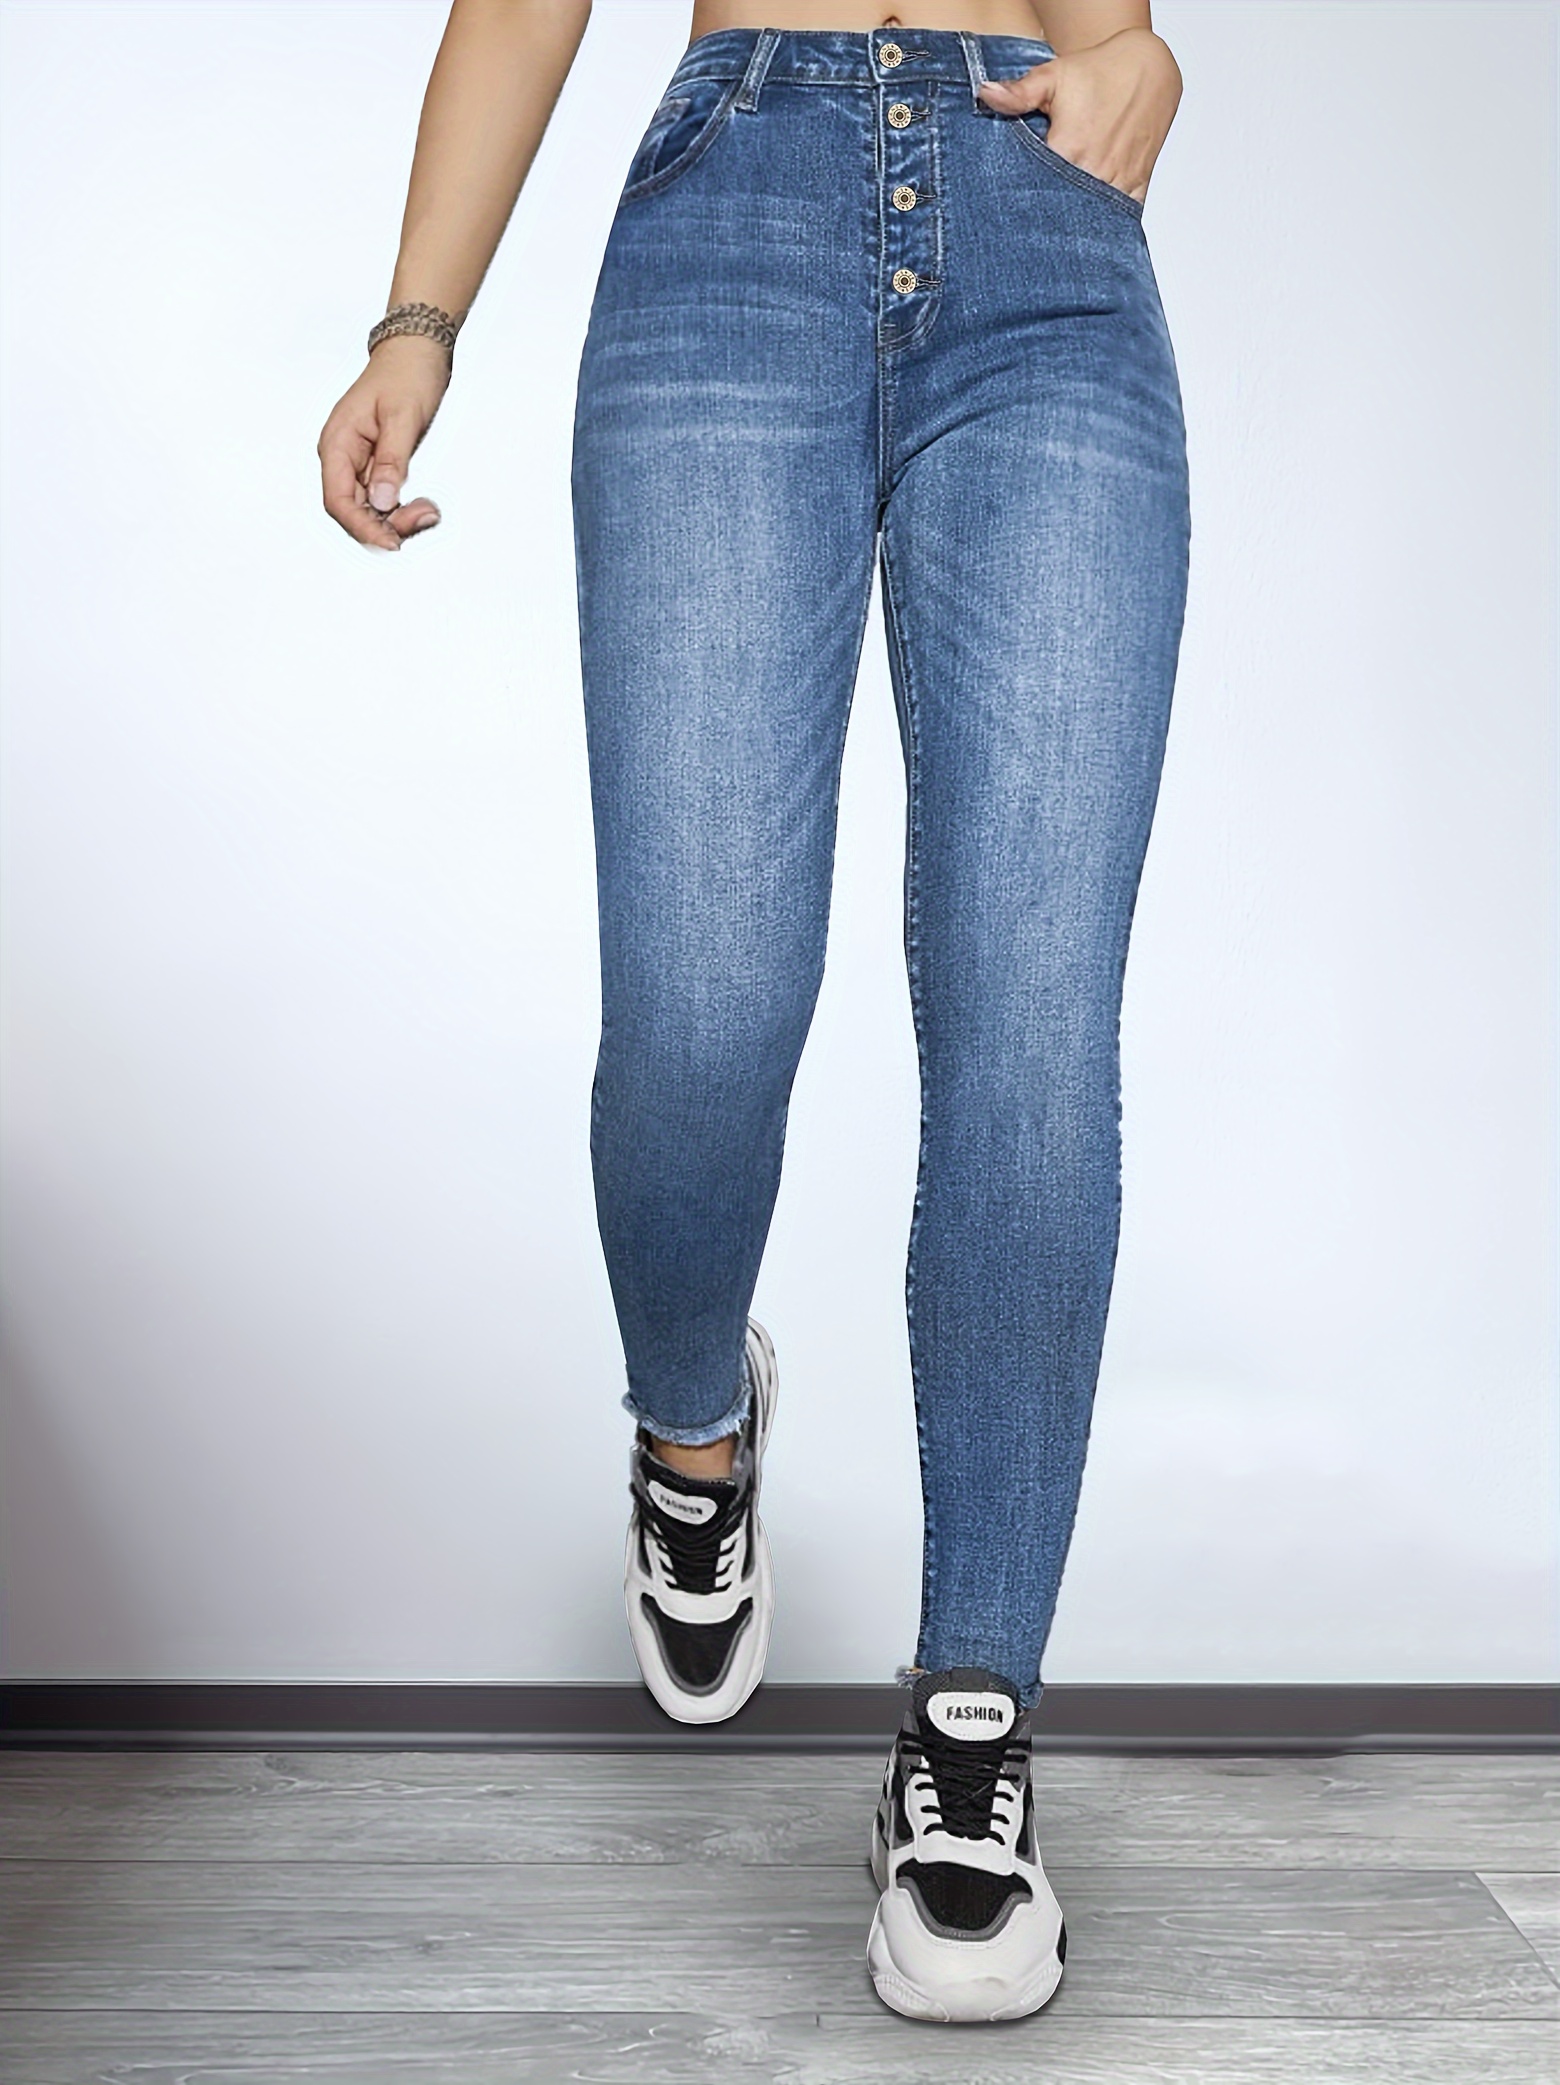 Vintage Double Breasted Skinny Jeans Women High Waist Chic Design